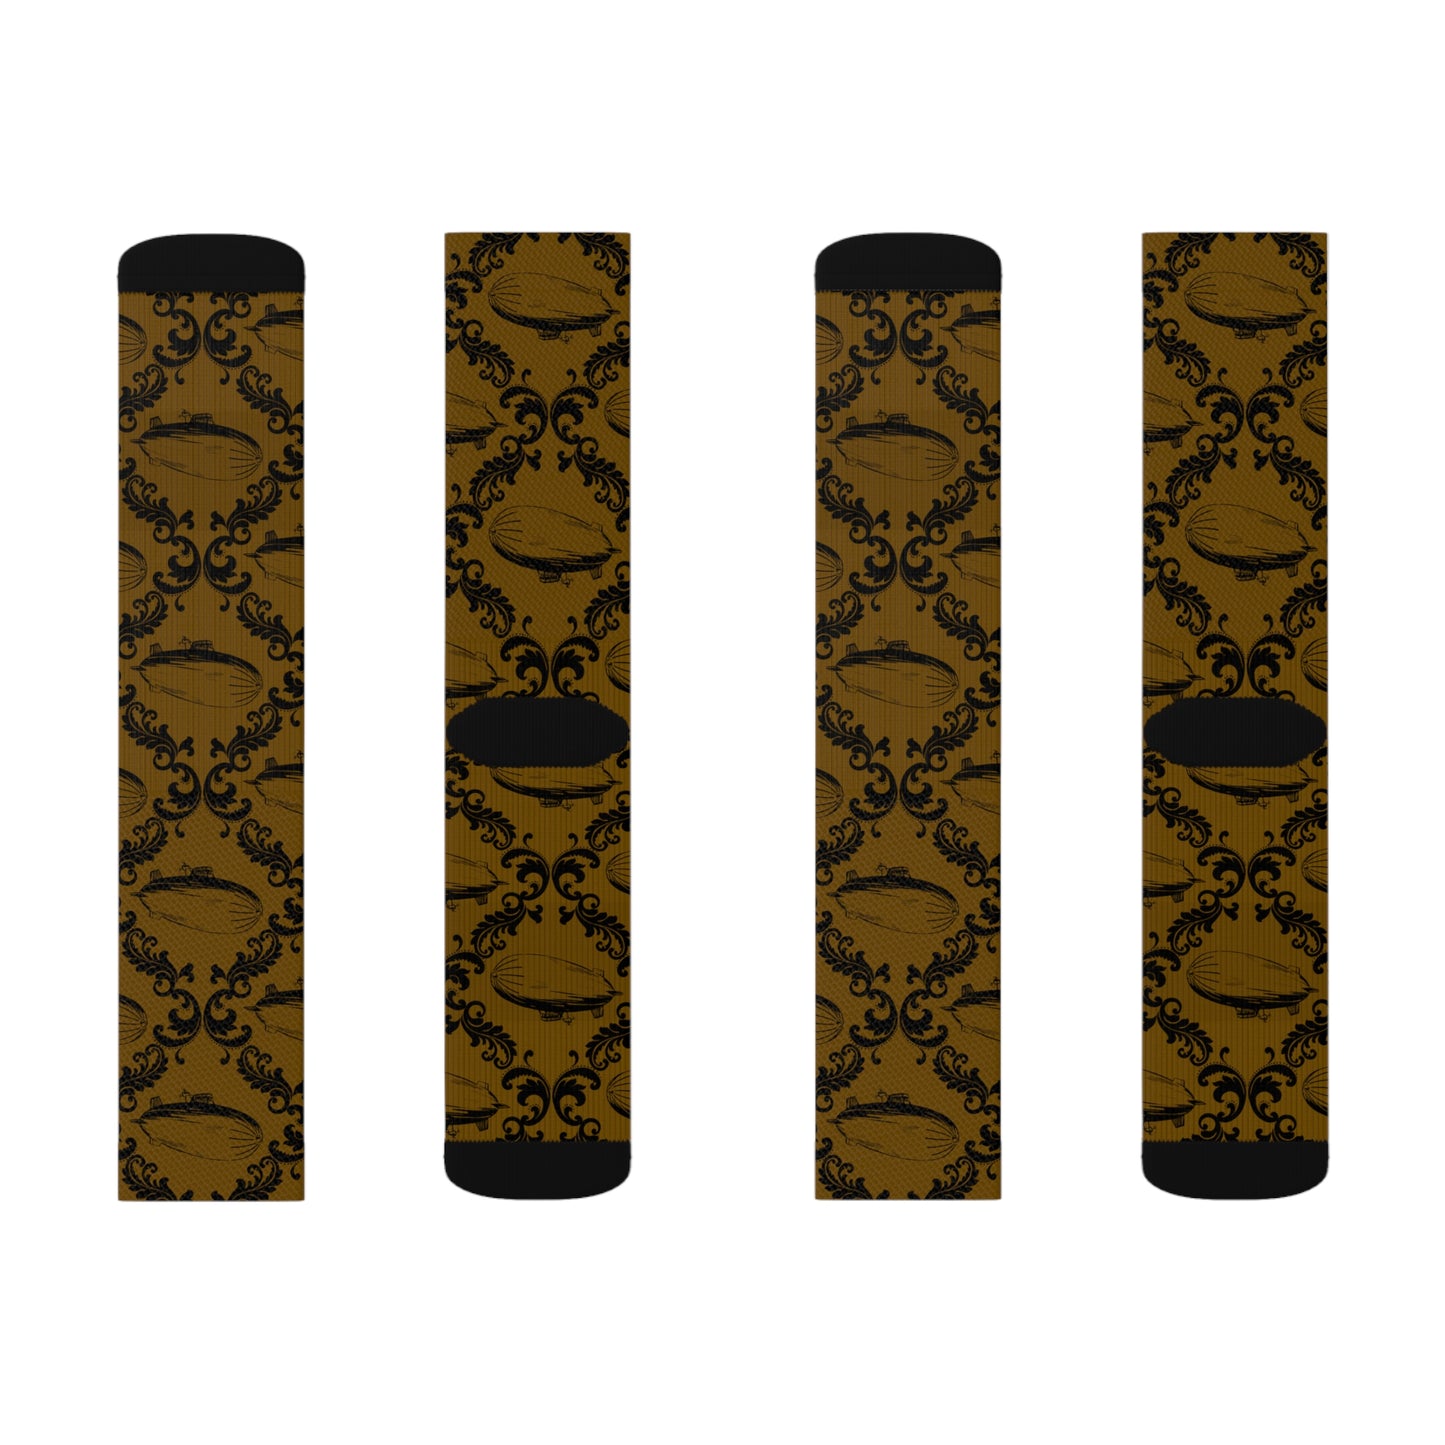 Airship Damask Steampunk Inspired Socks Lord and Lady Towers